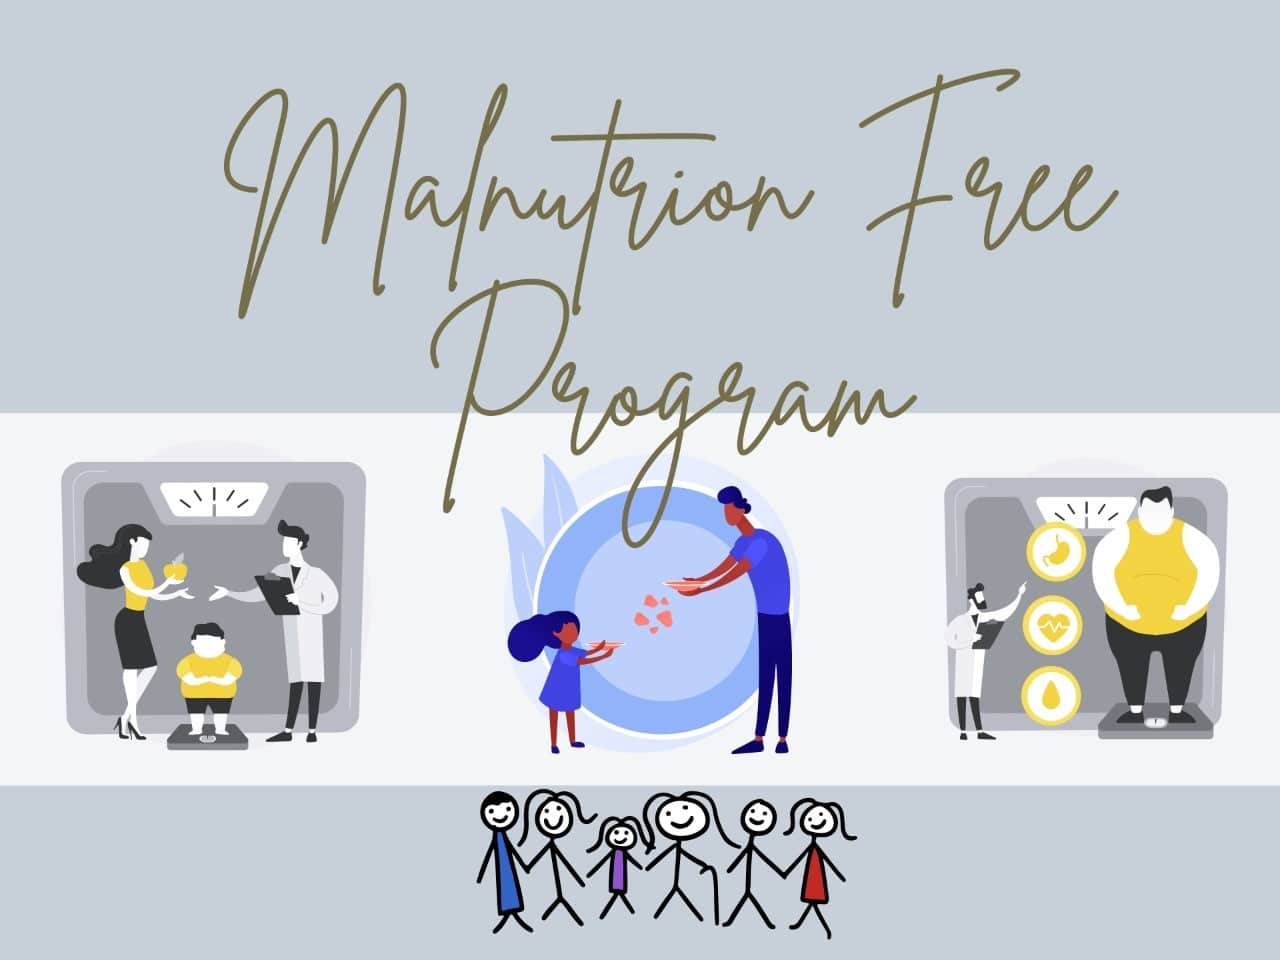 Moving on with hope: Malnutrition Free Program